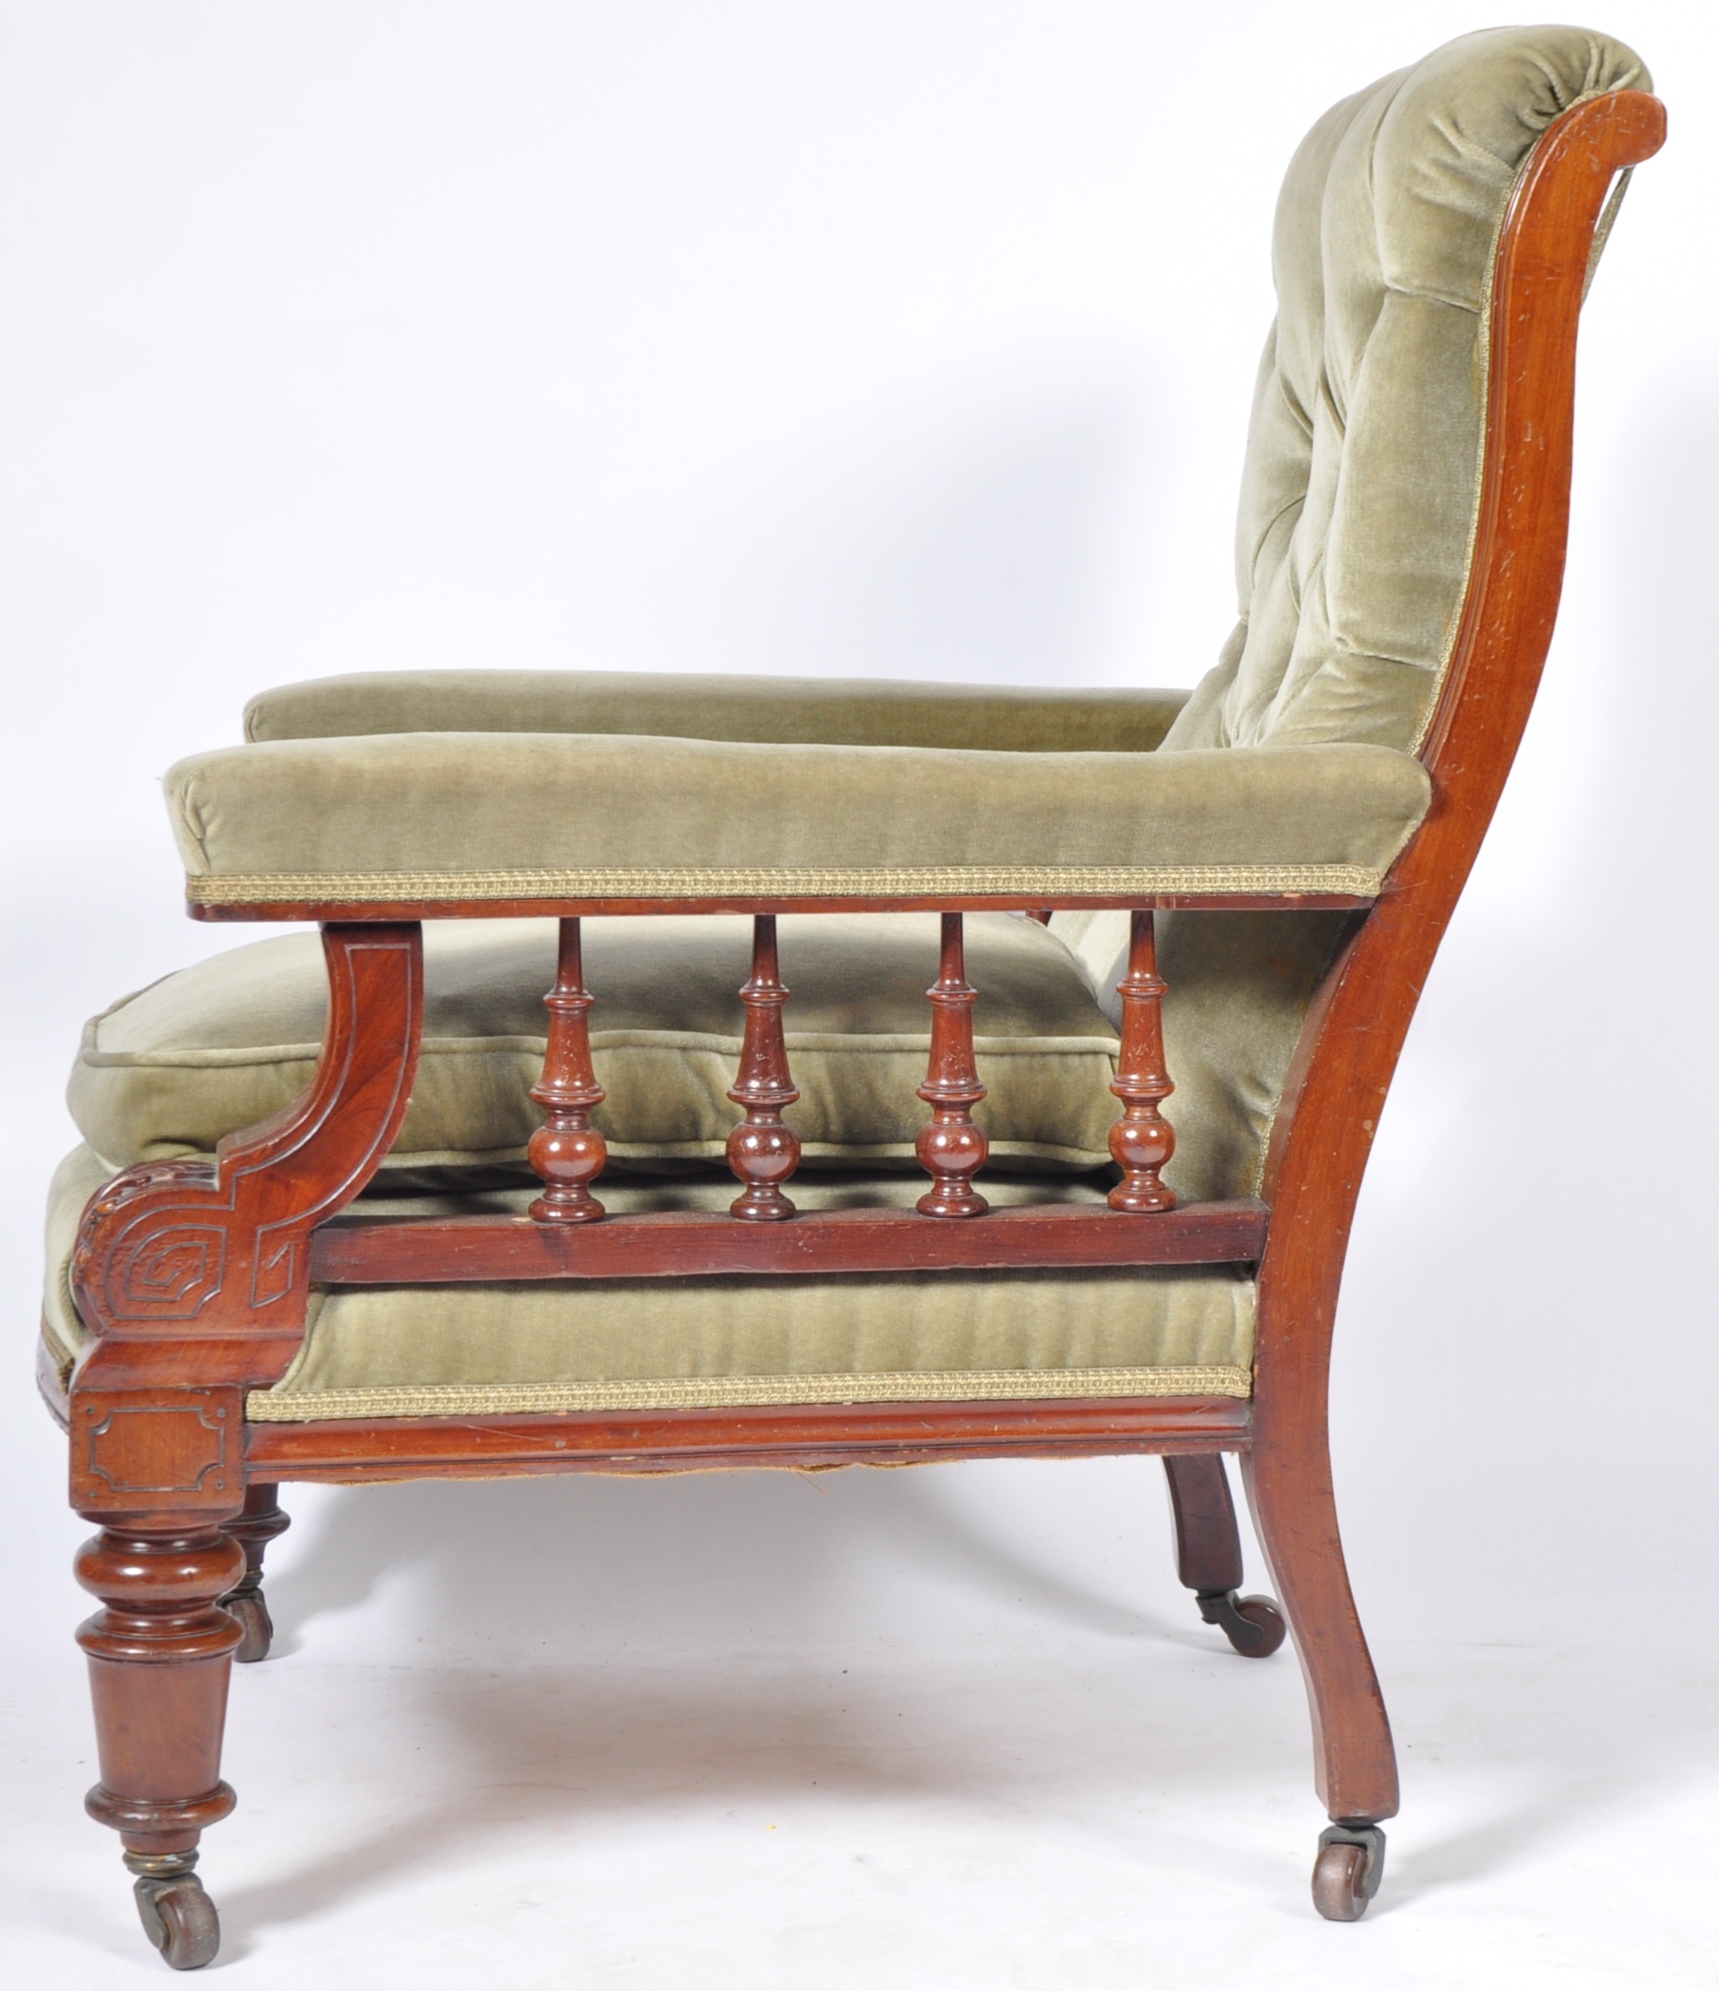 ANTIQUE 19TH CENTURY VICTORIAN MAHOGANY LIBRARY ARMCHAIR - Image 10 of 10